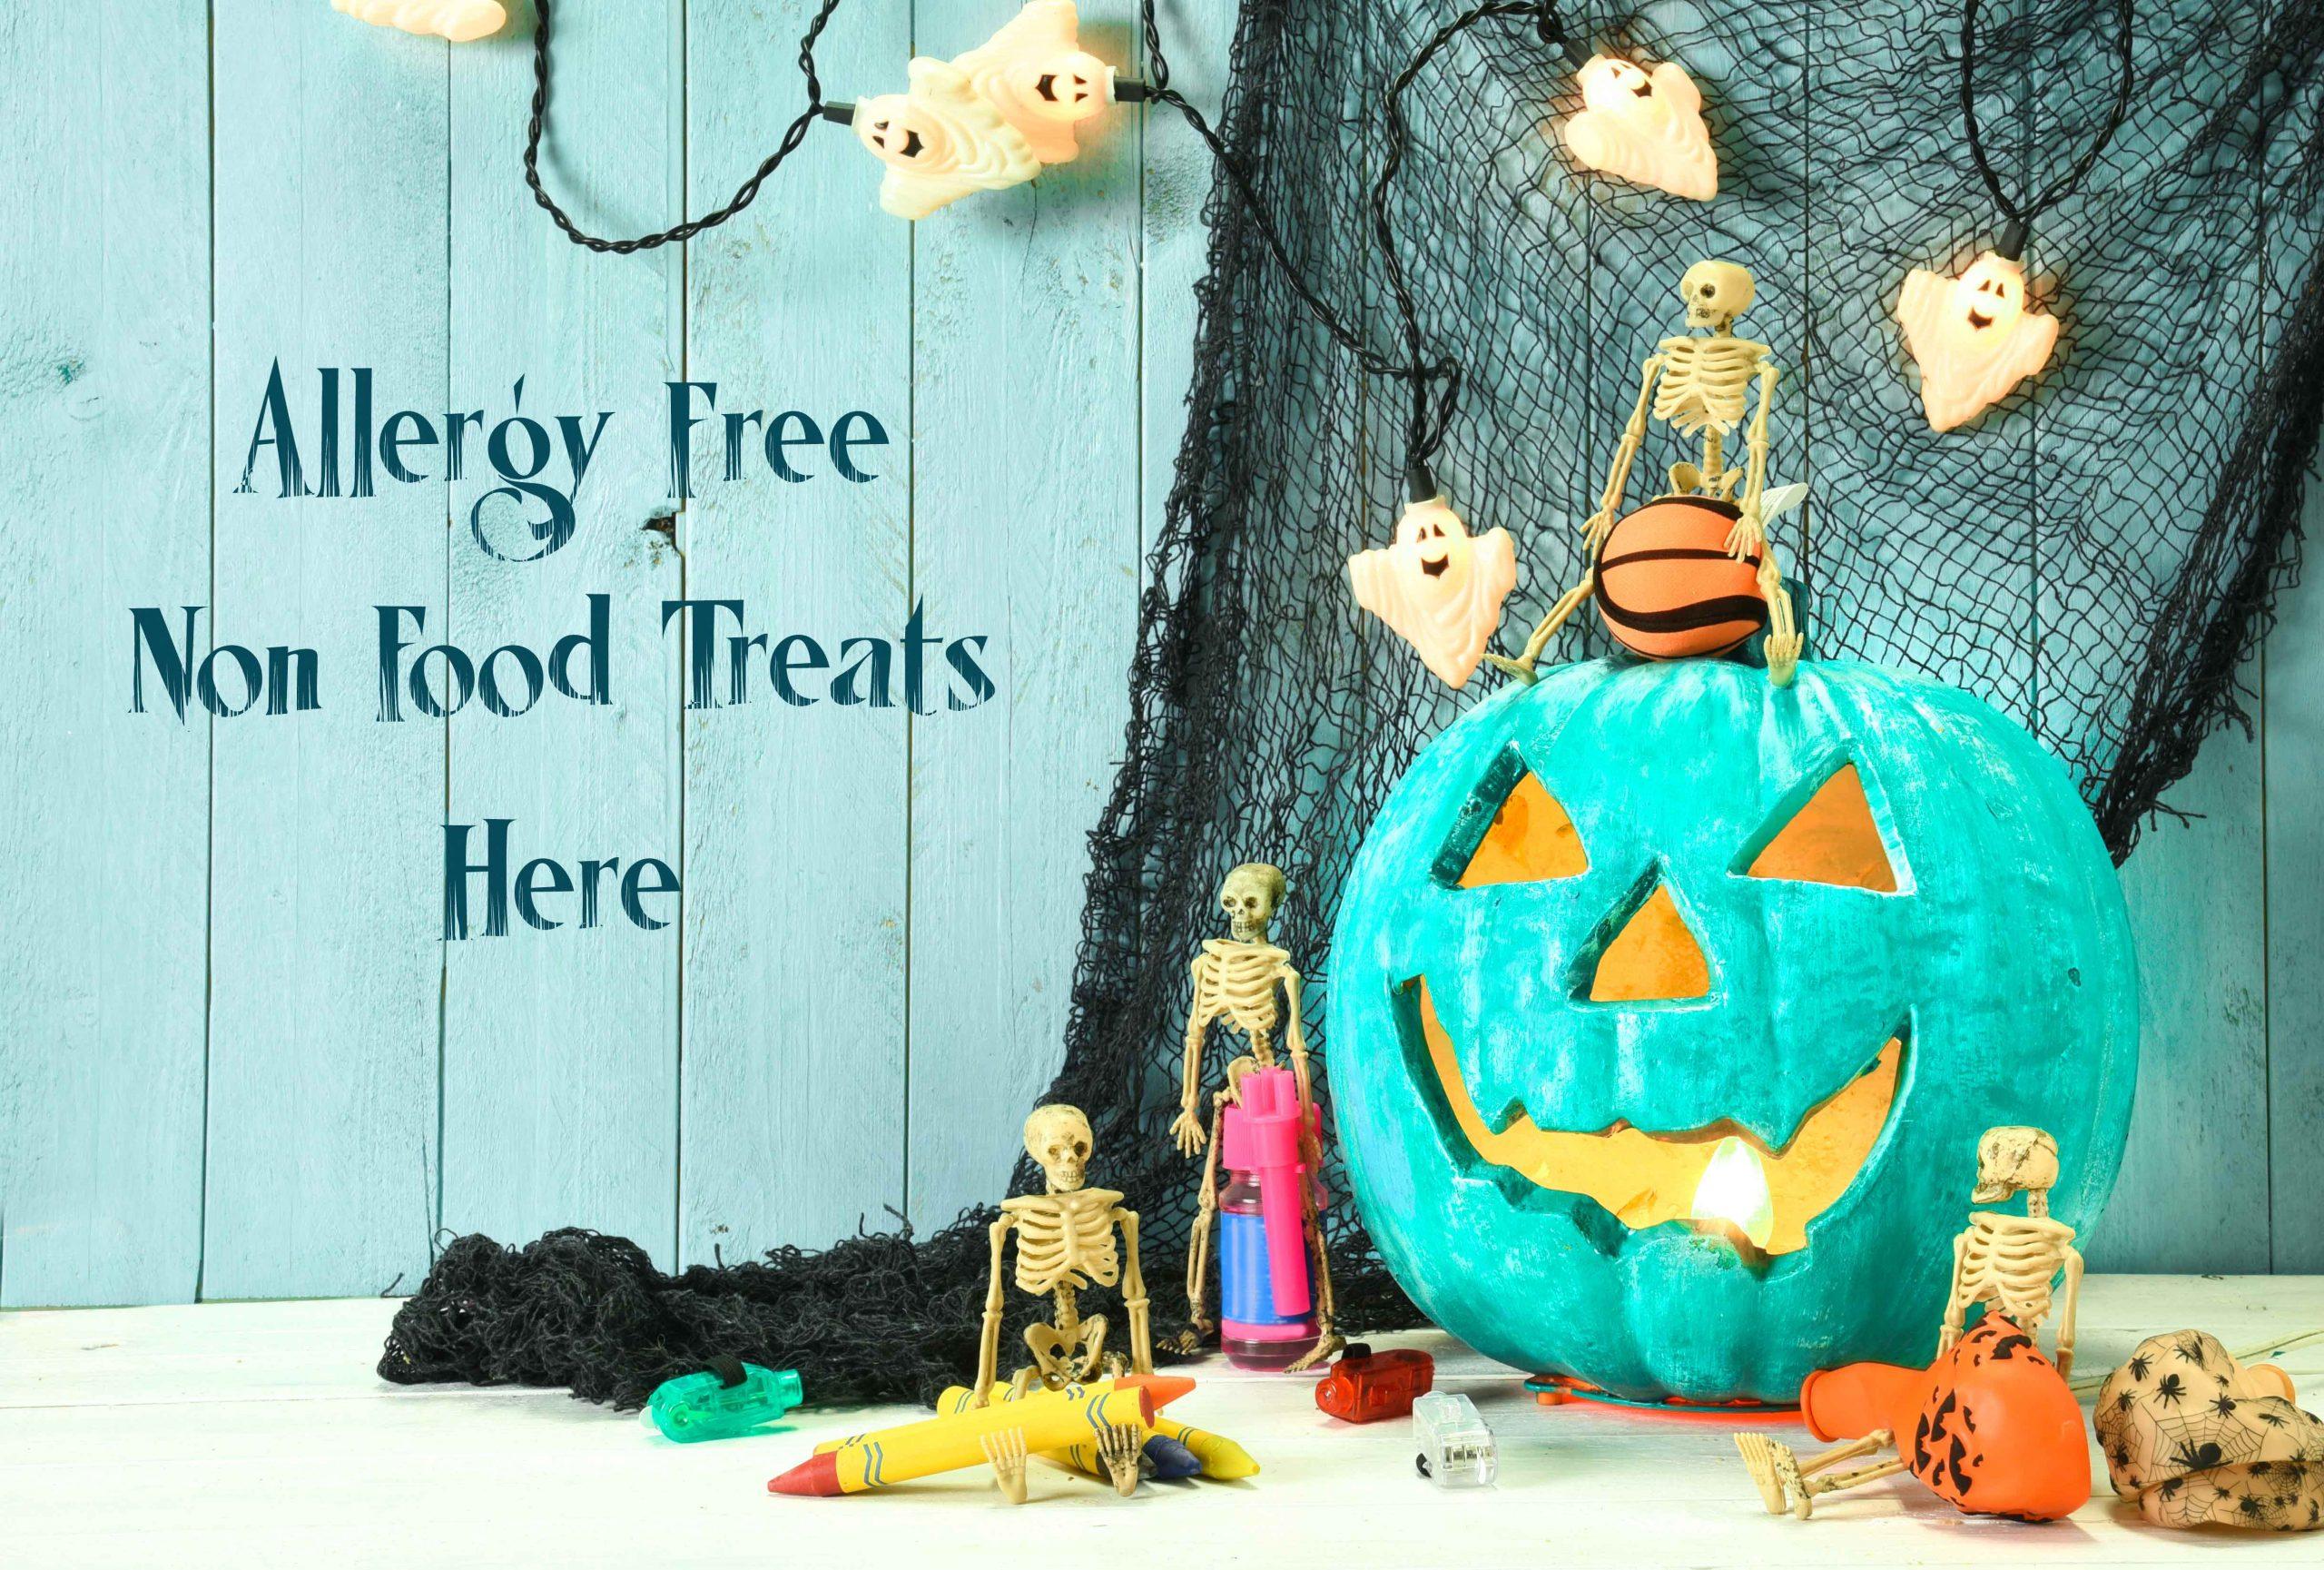 Find out what the Teal Pumpkin Project is and how to get involved. Also learn about the switch witch and other ways to make Halloween healthier.